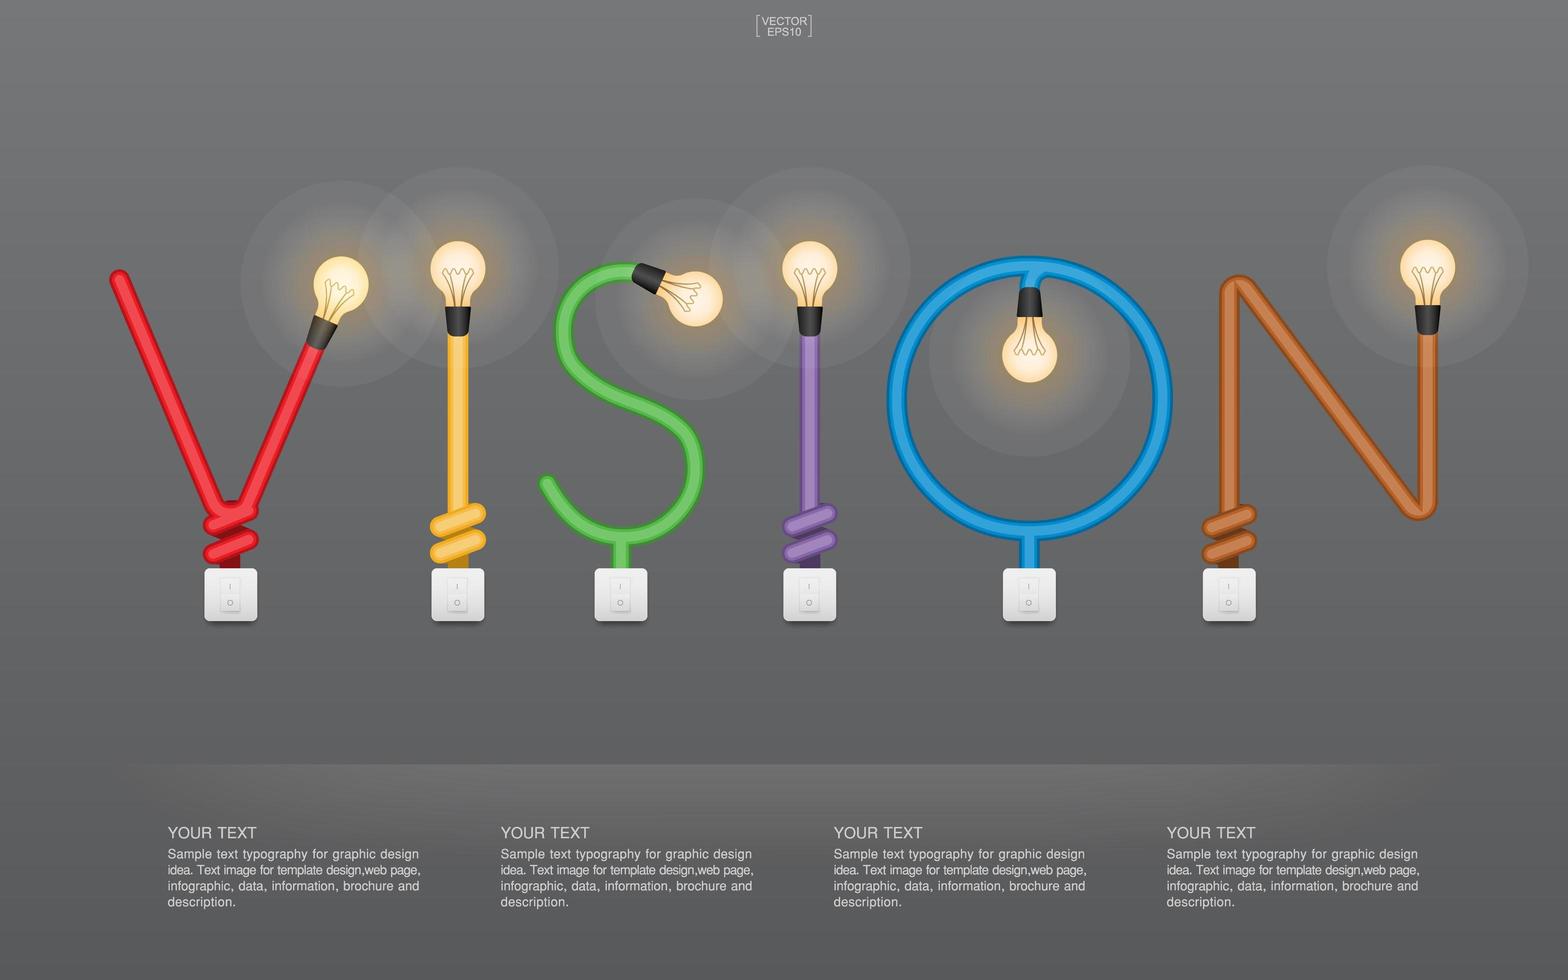 Colorful vision text made of light bulbs and switches vector